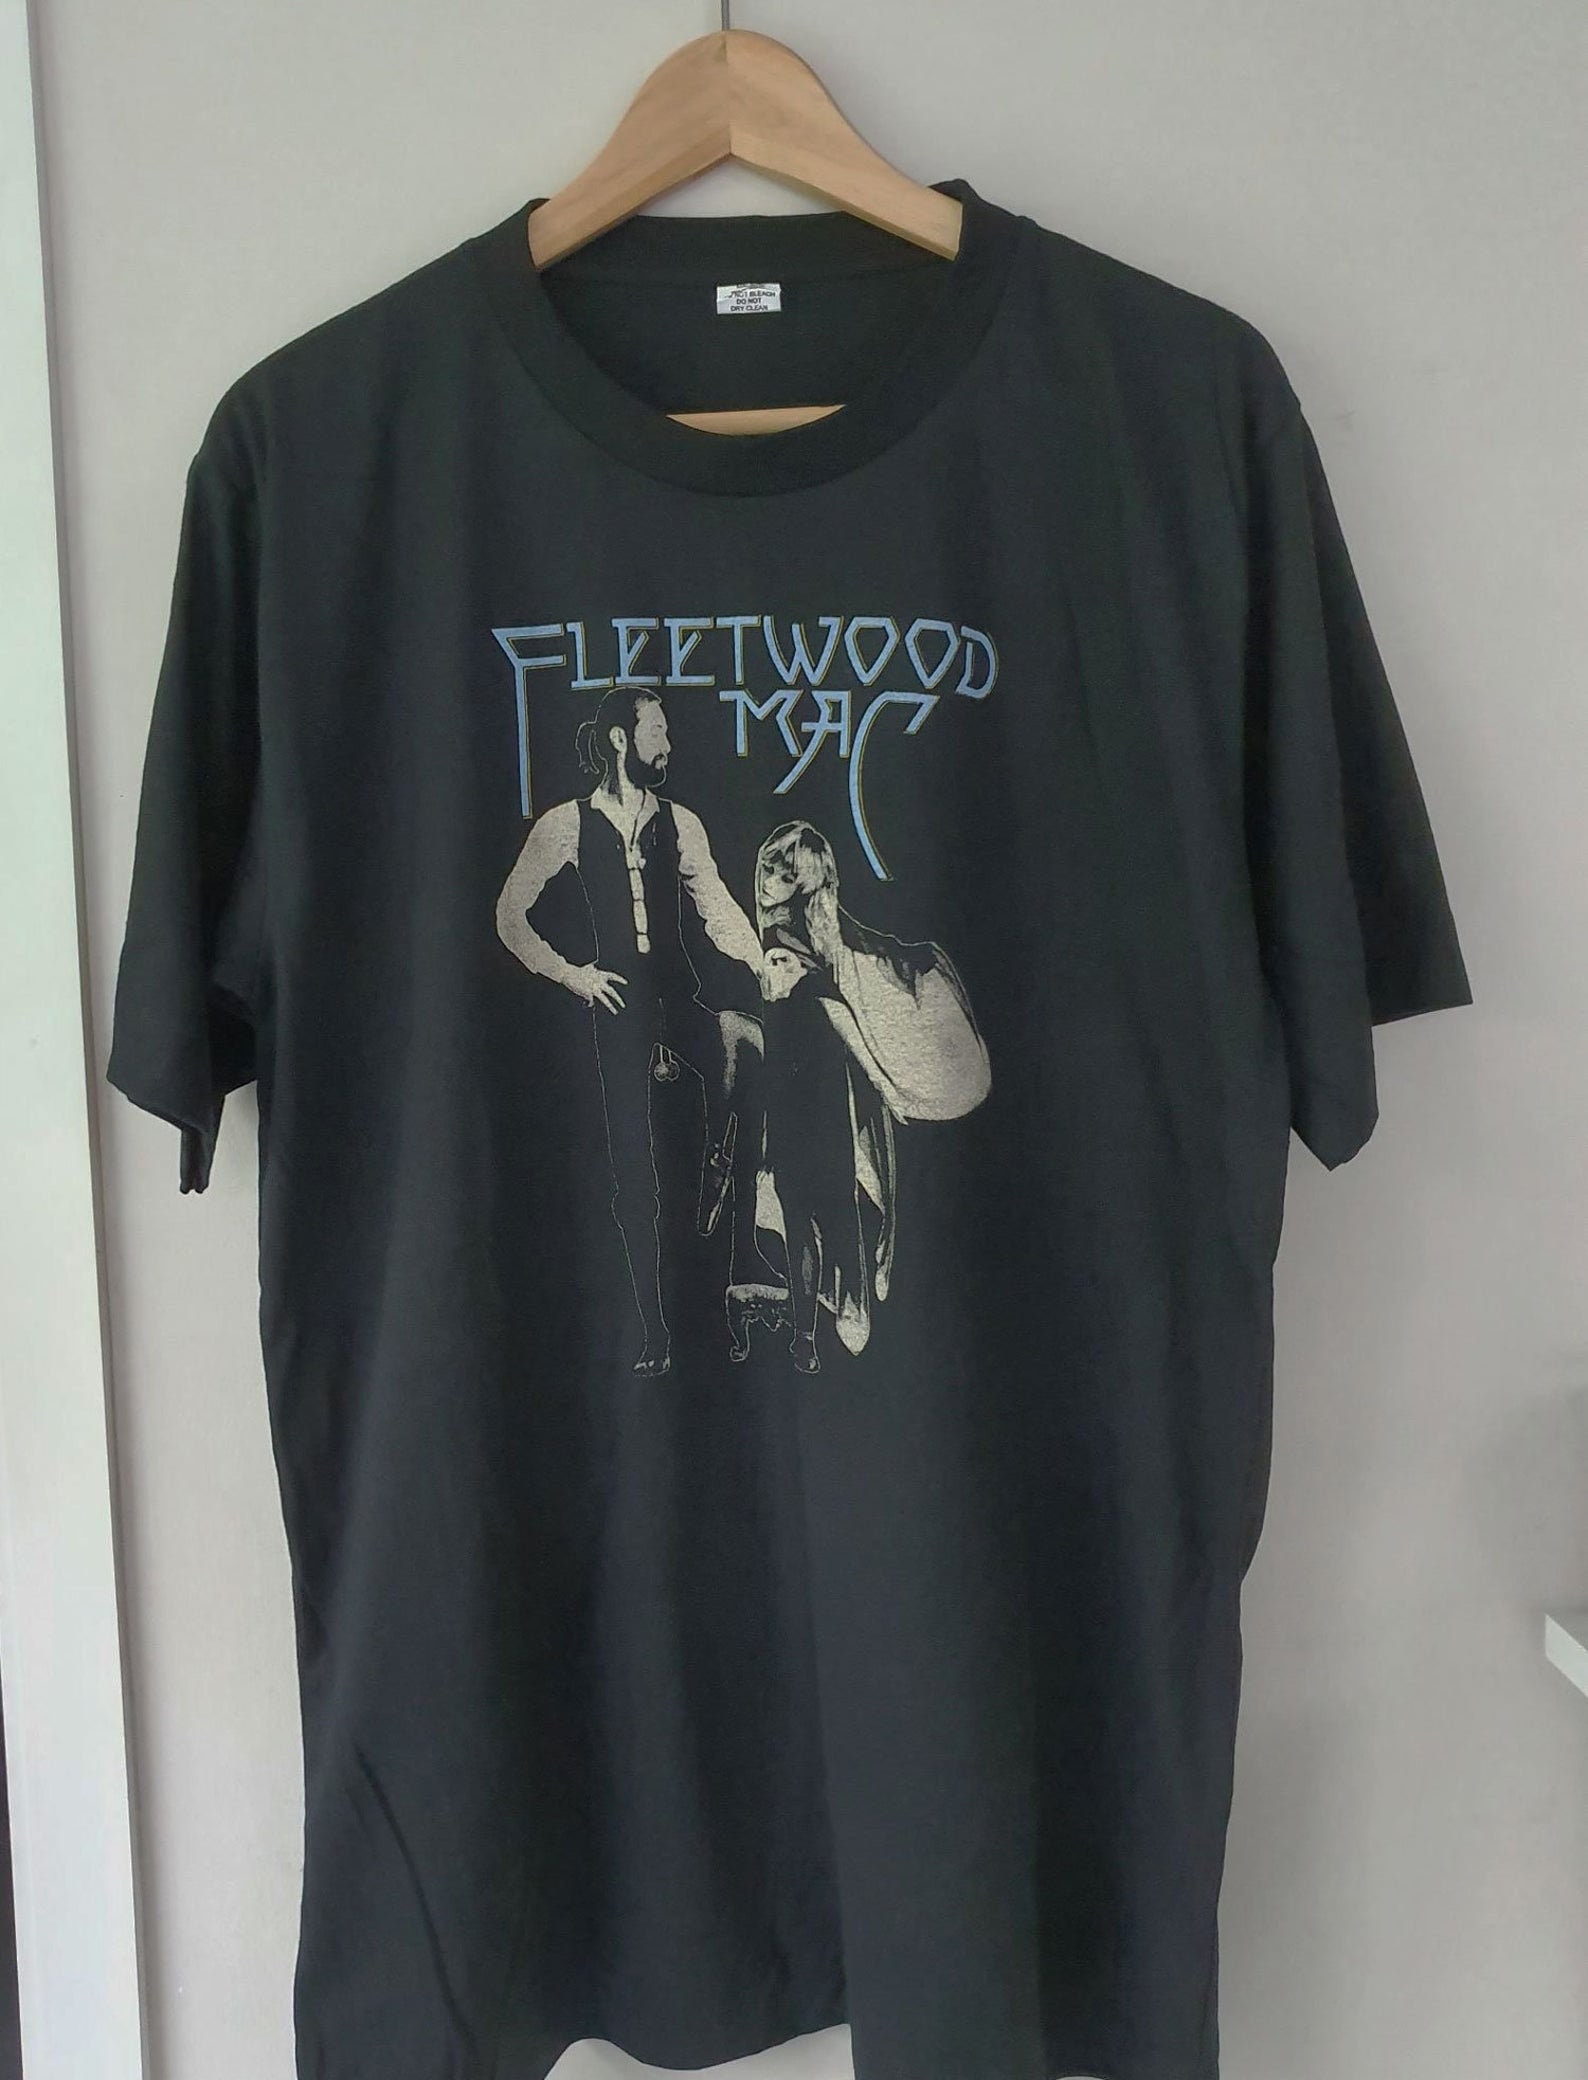 Fleetwood Mac T-Shirt Made in US | Etsy